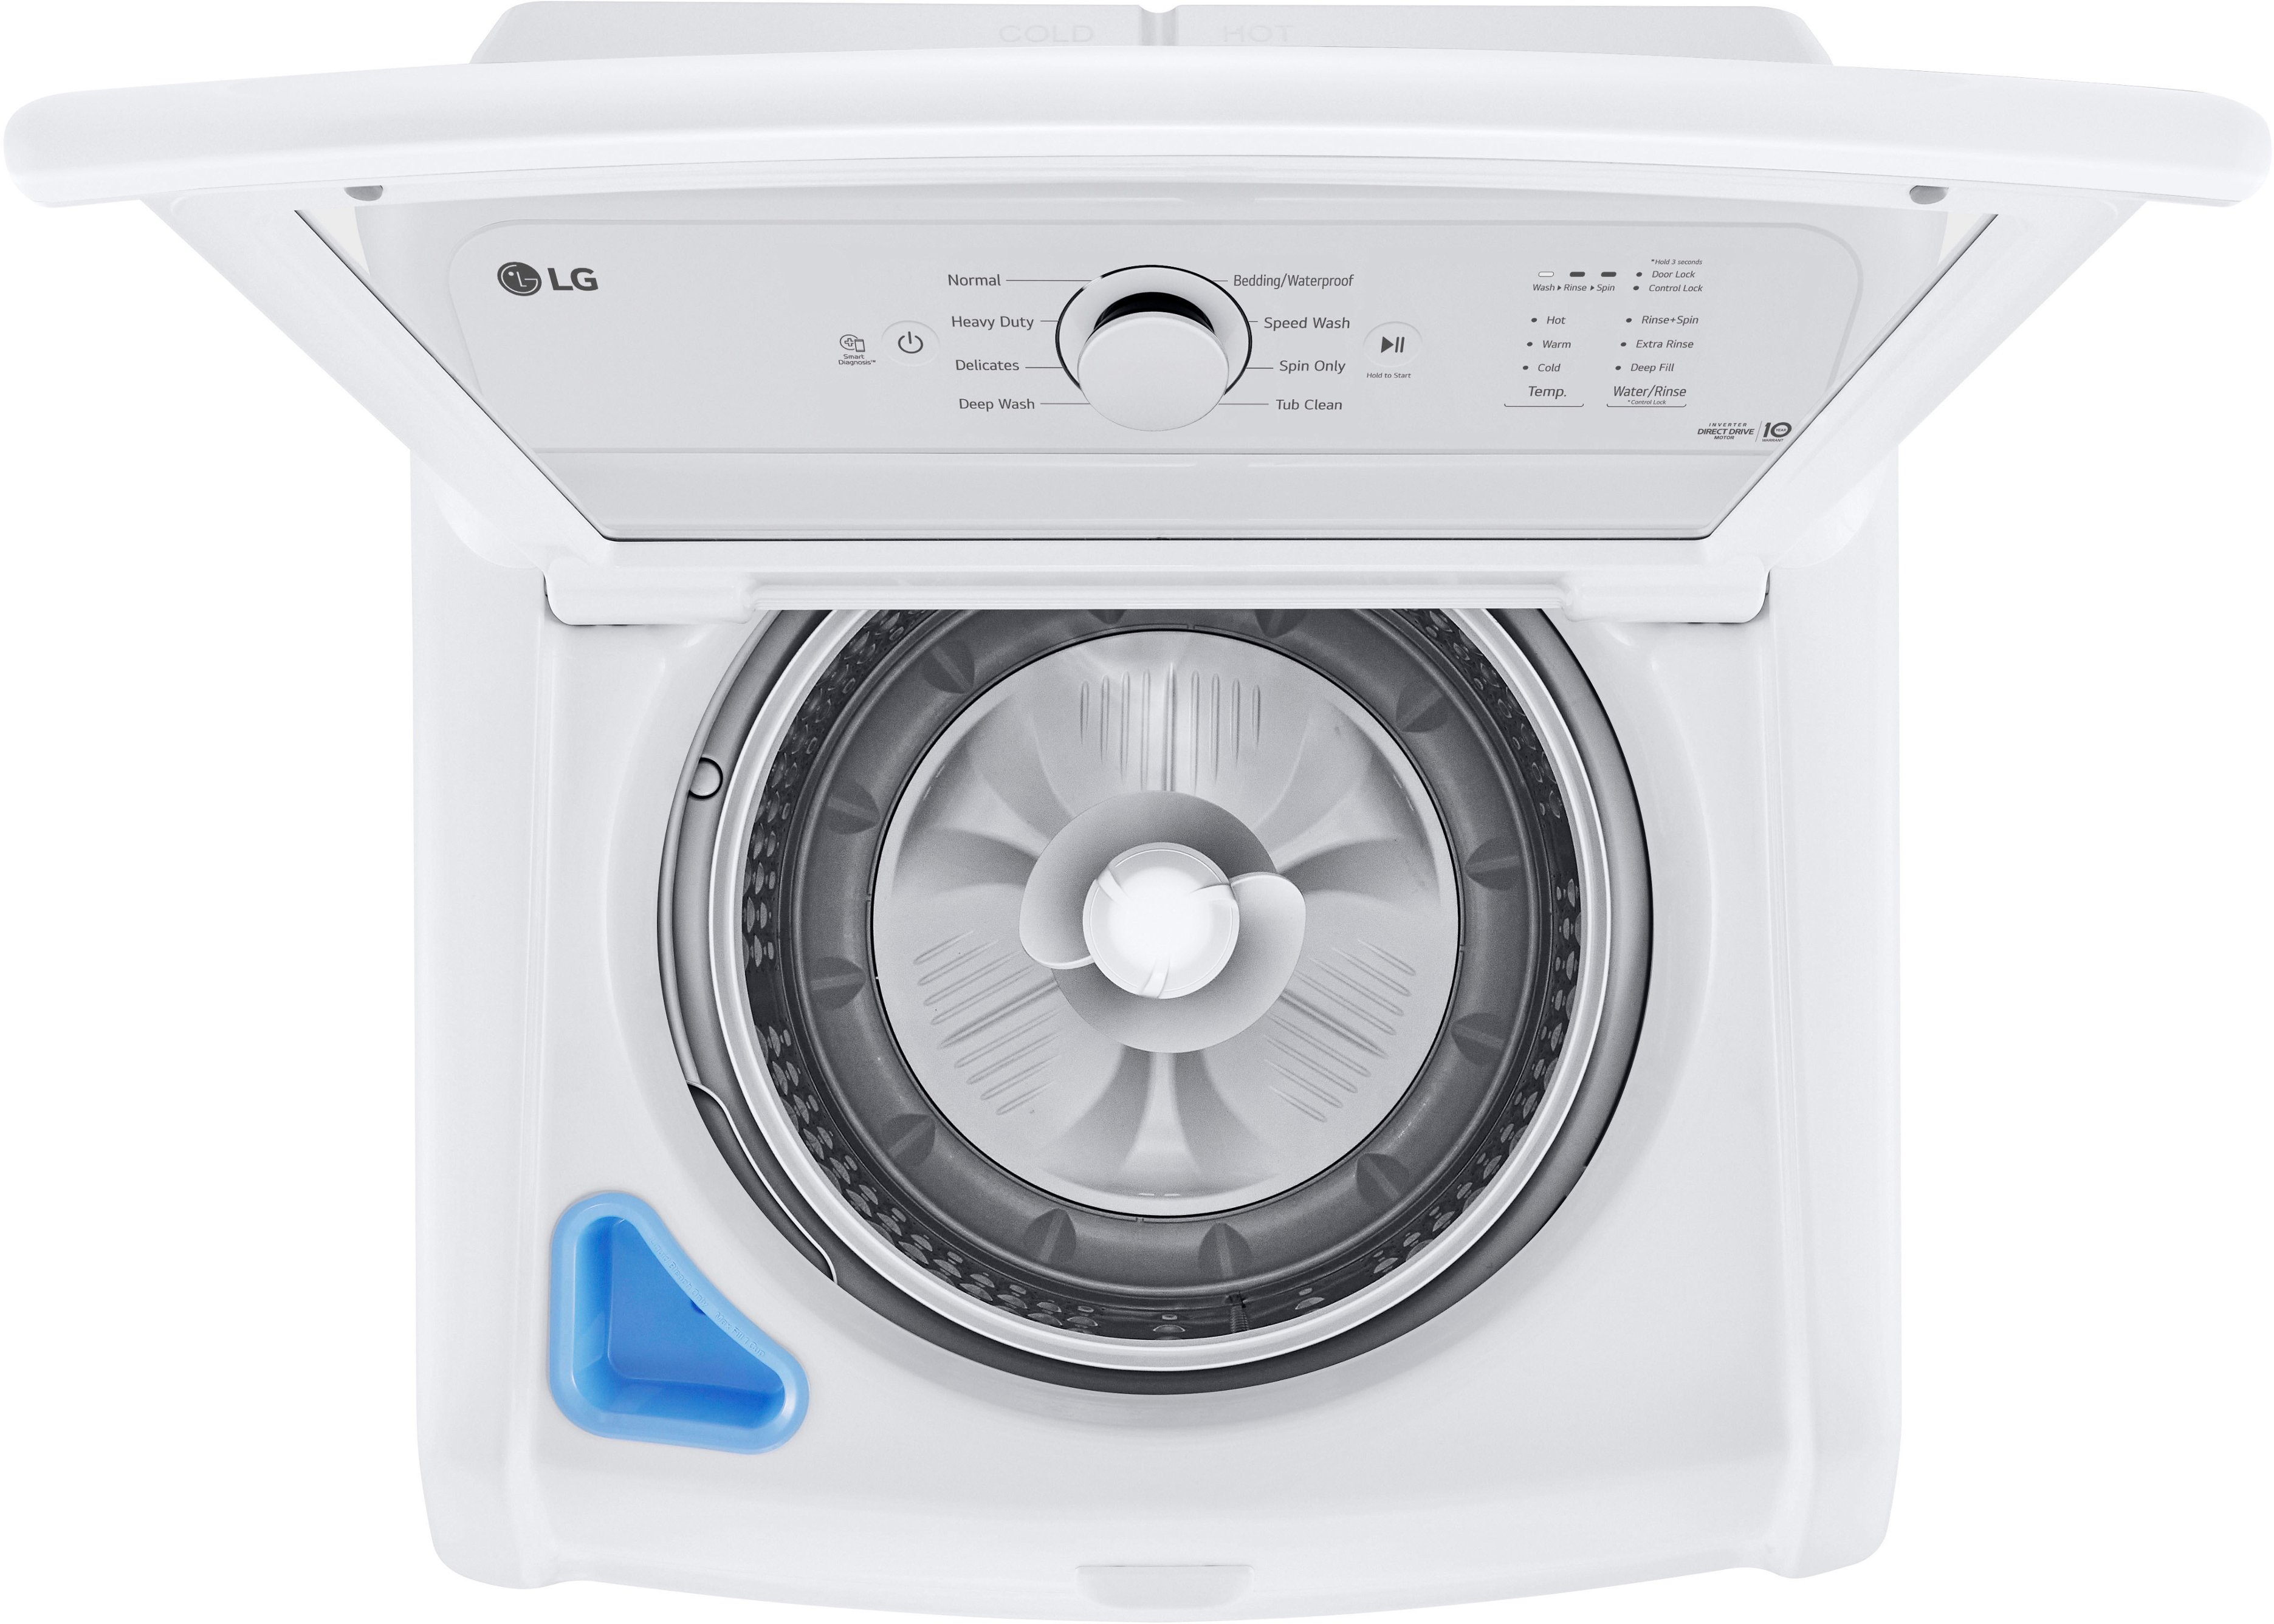 LG 4.1 Glass Cu. Lid Washer White with Load Ft. Best Buy SlamProof Top WT6105CW 